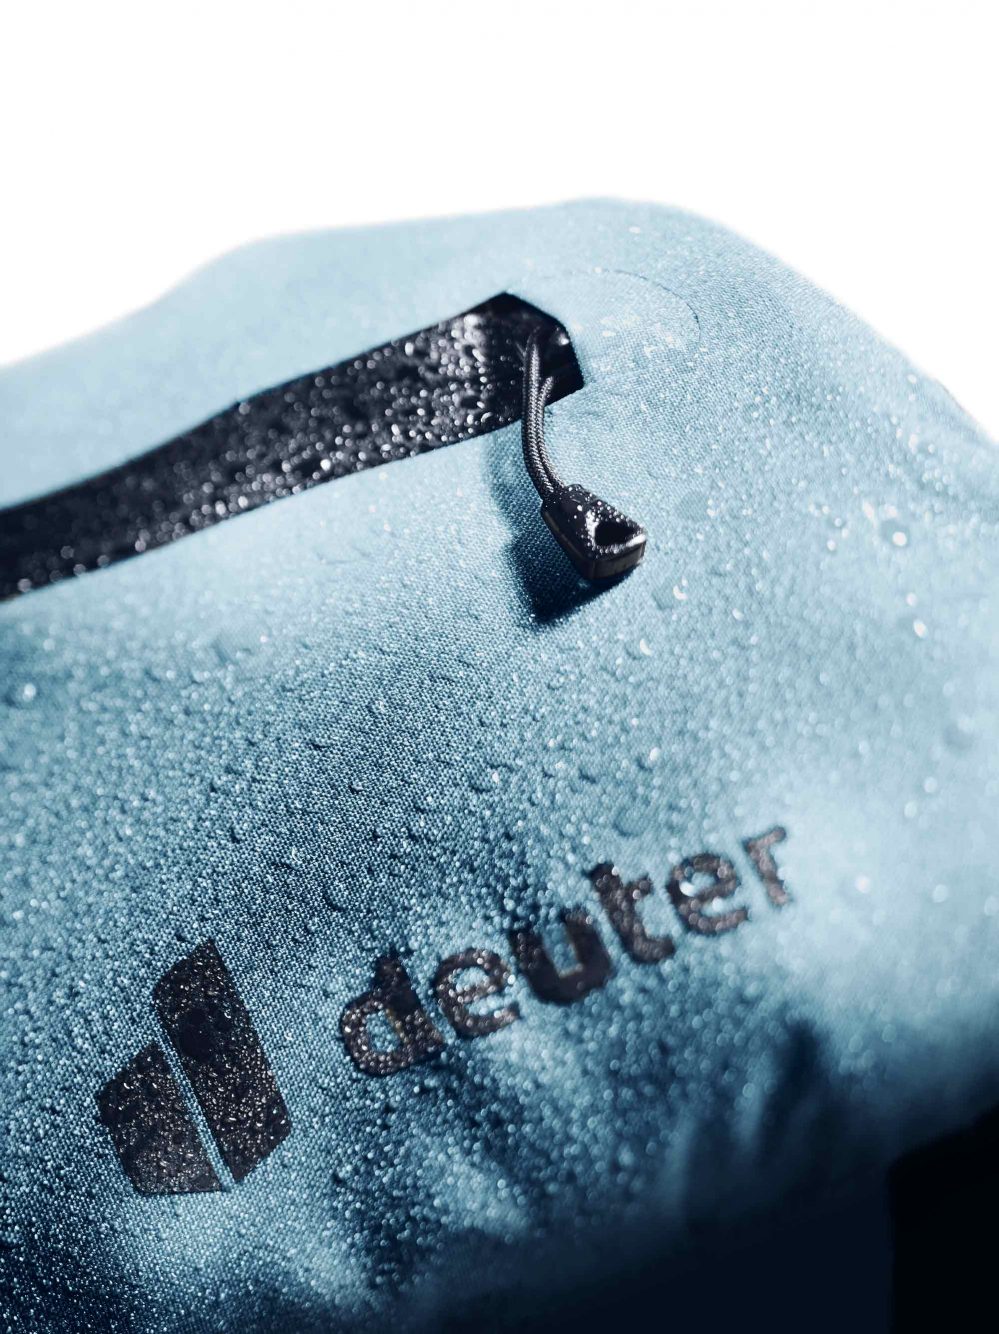 The deuter cabezon parts - including zippers - are well protected against water penetration.